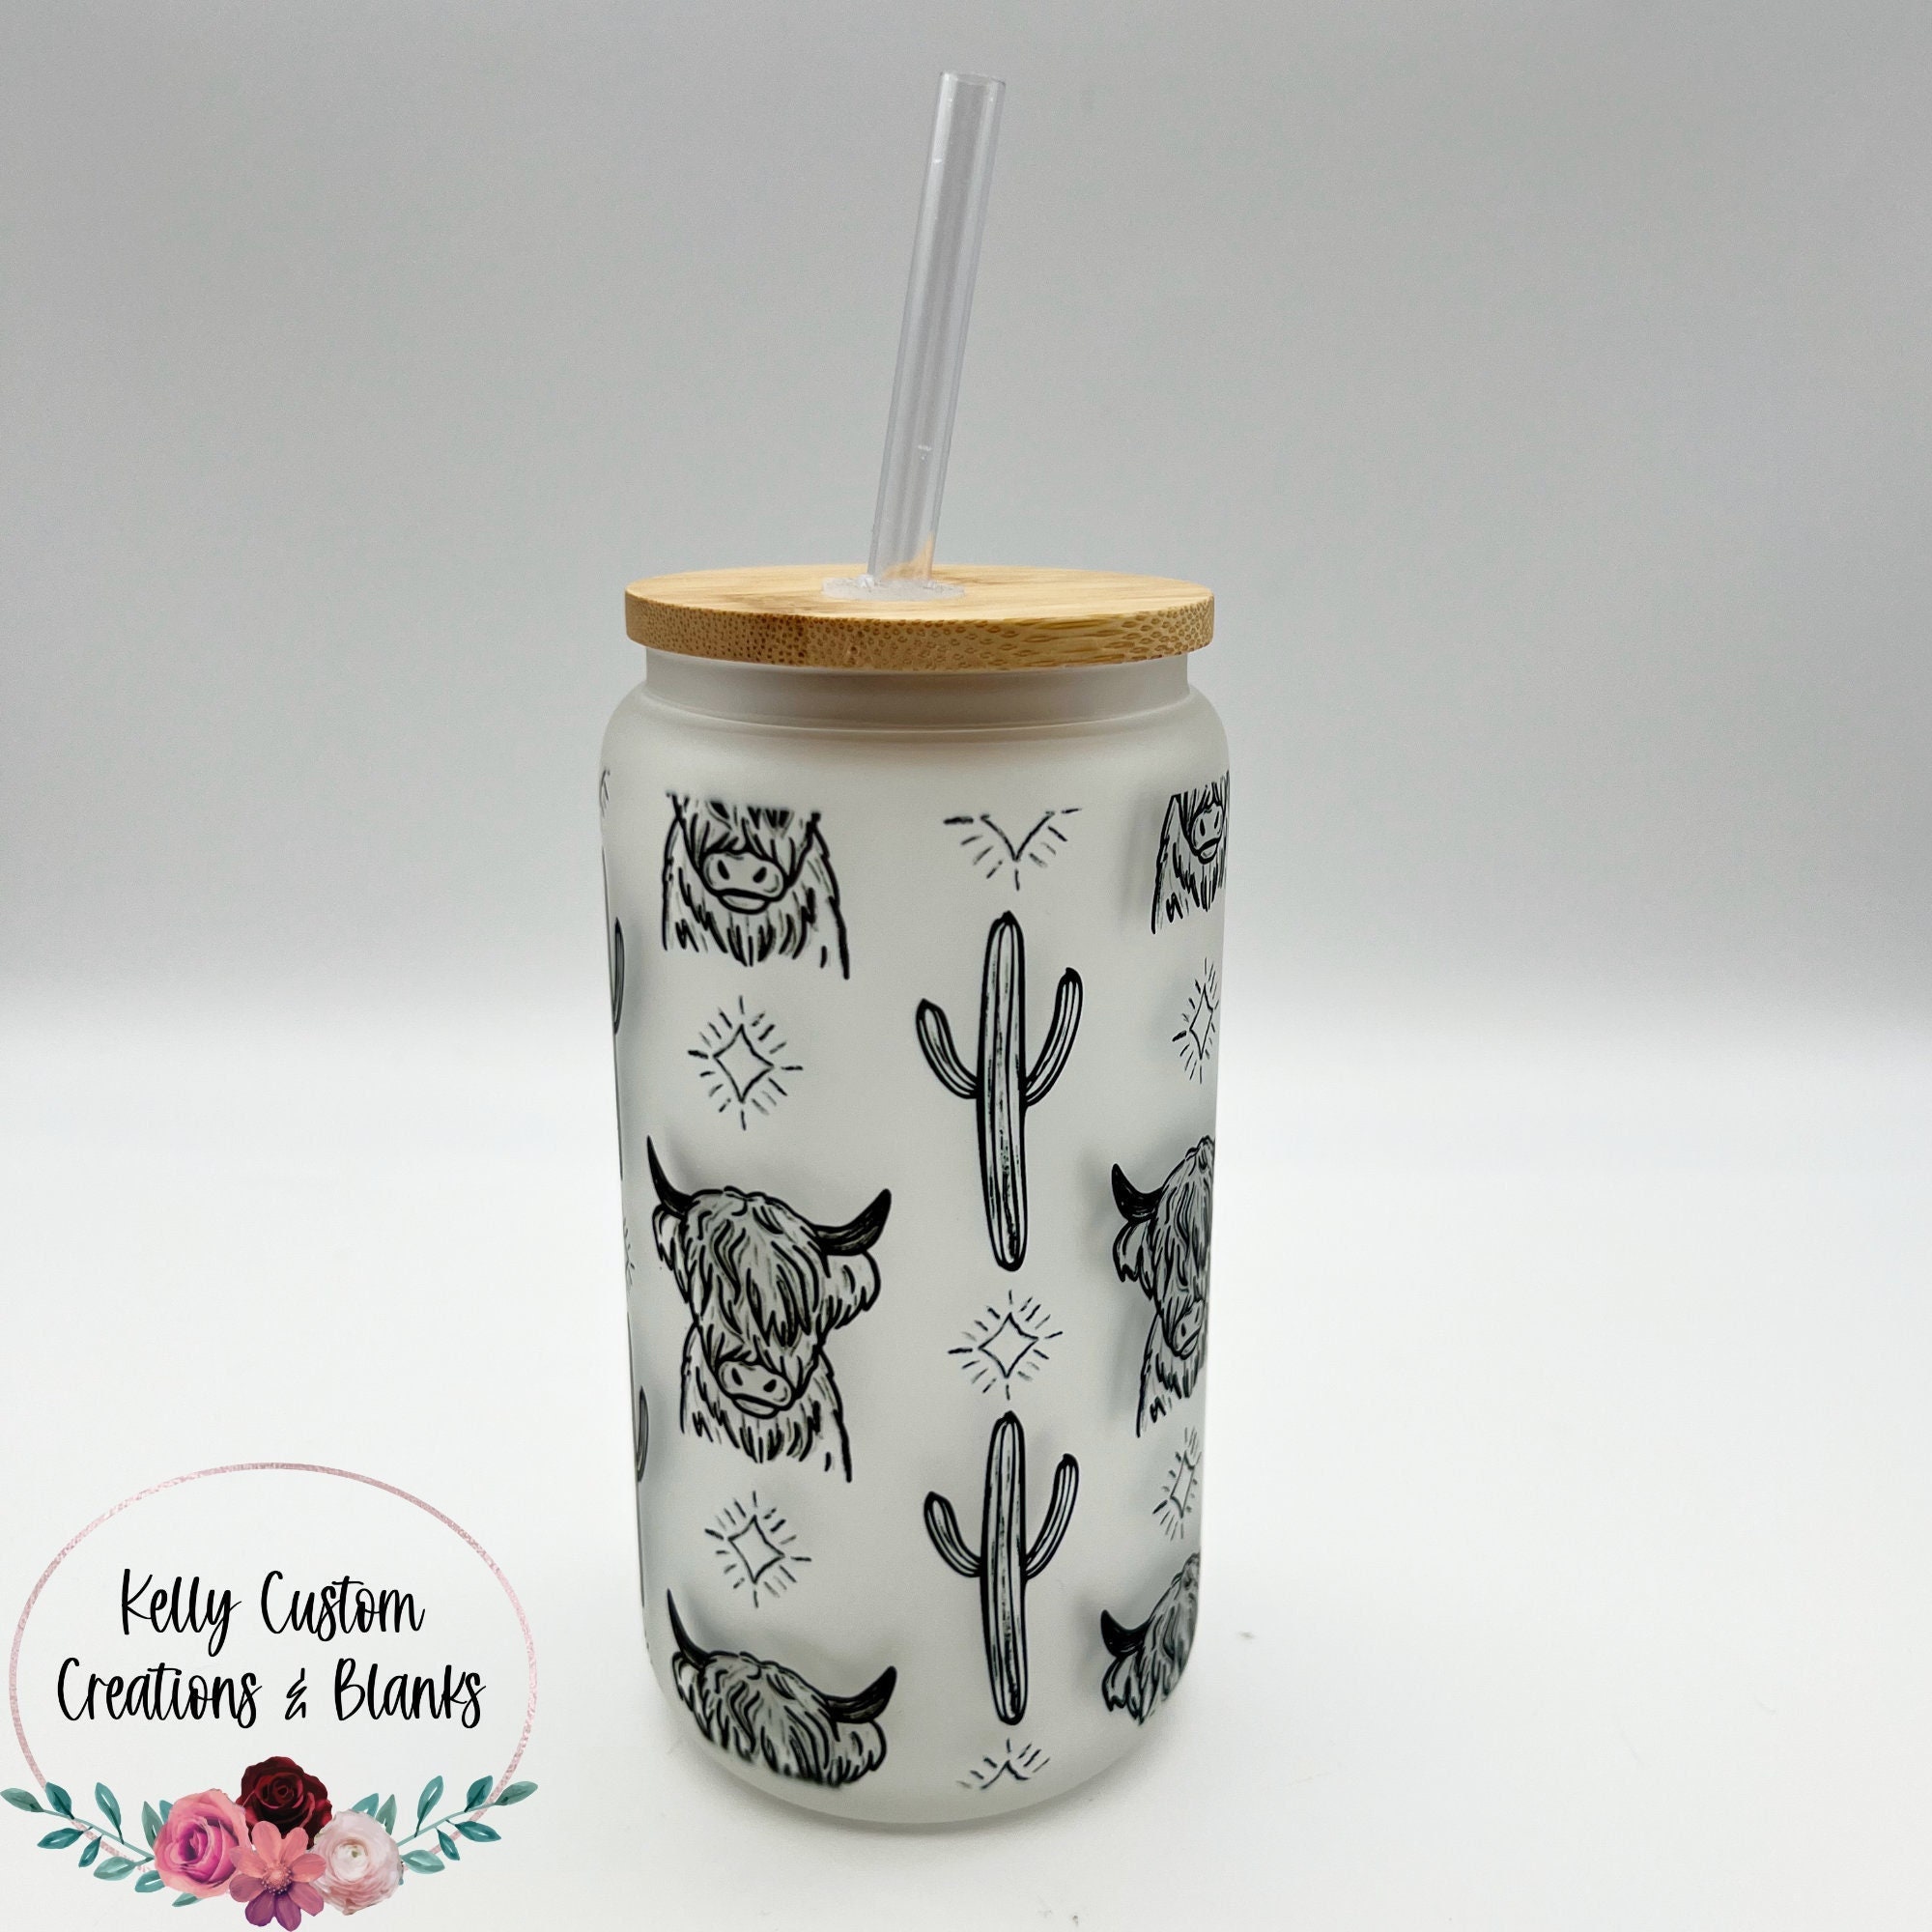 16oz Frosted Glass Iced Coffee Love Tumbler – Middleton Park Coffee